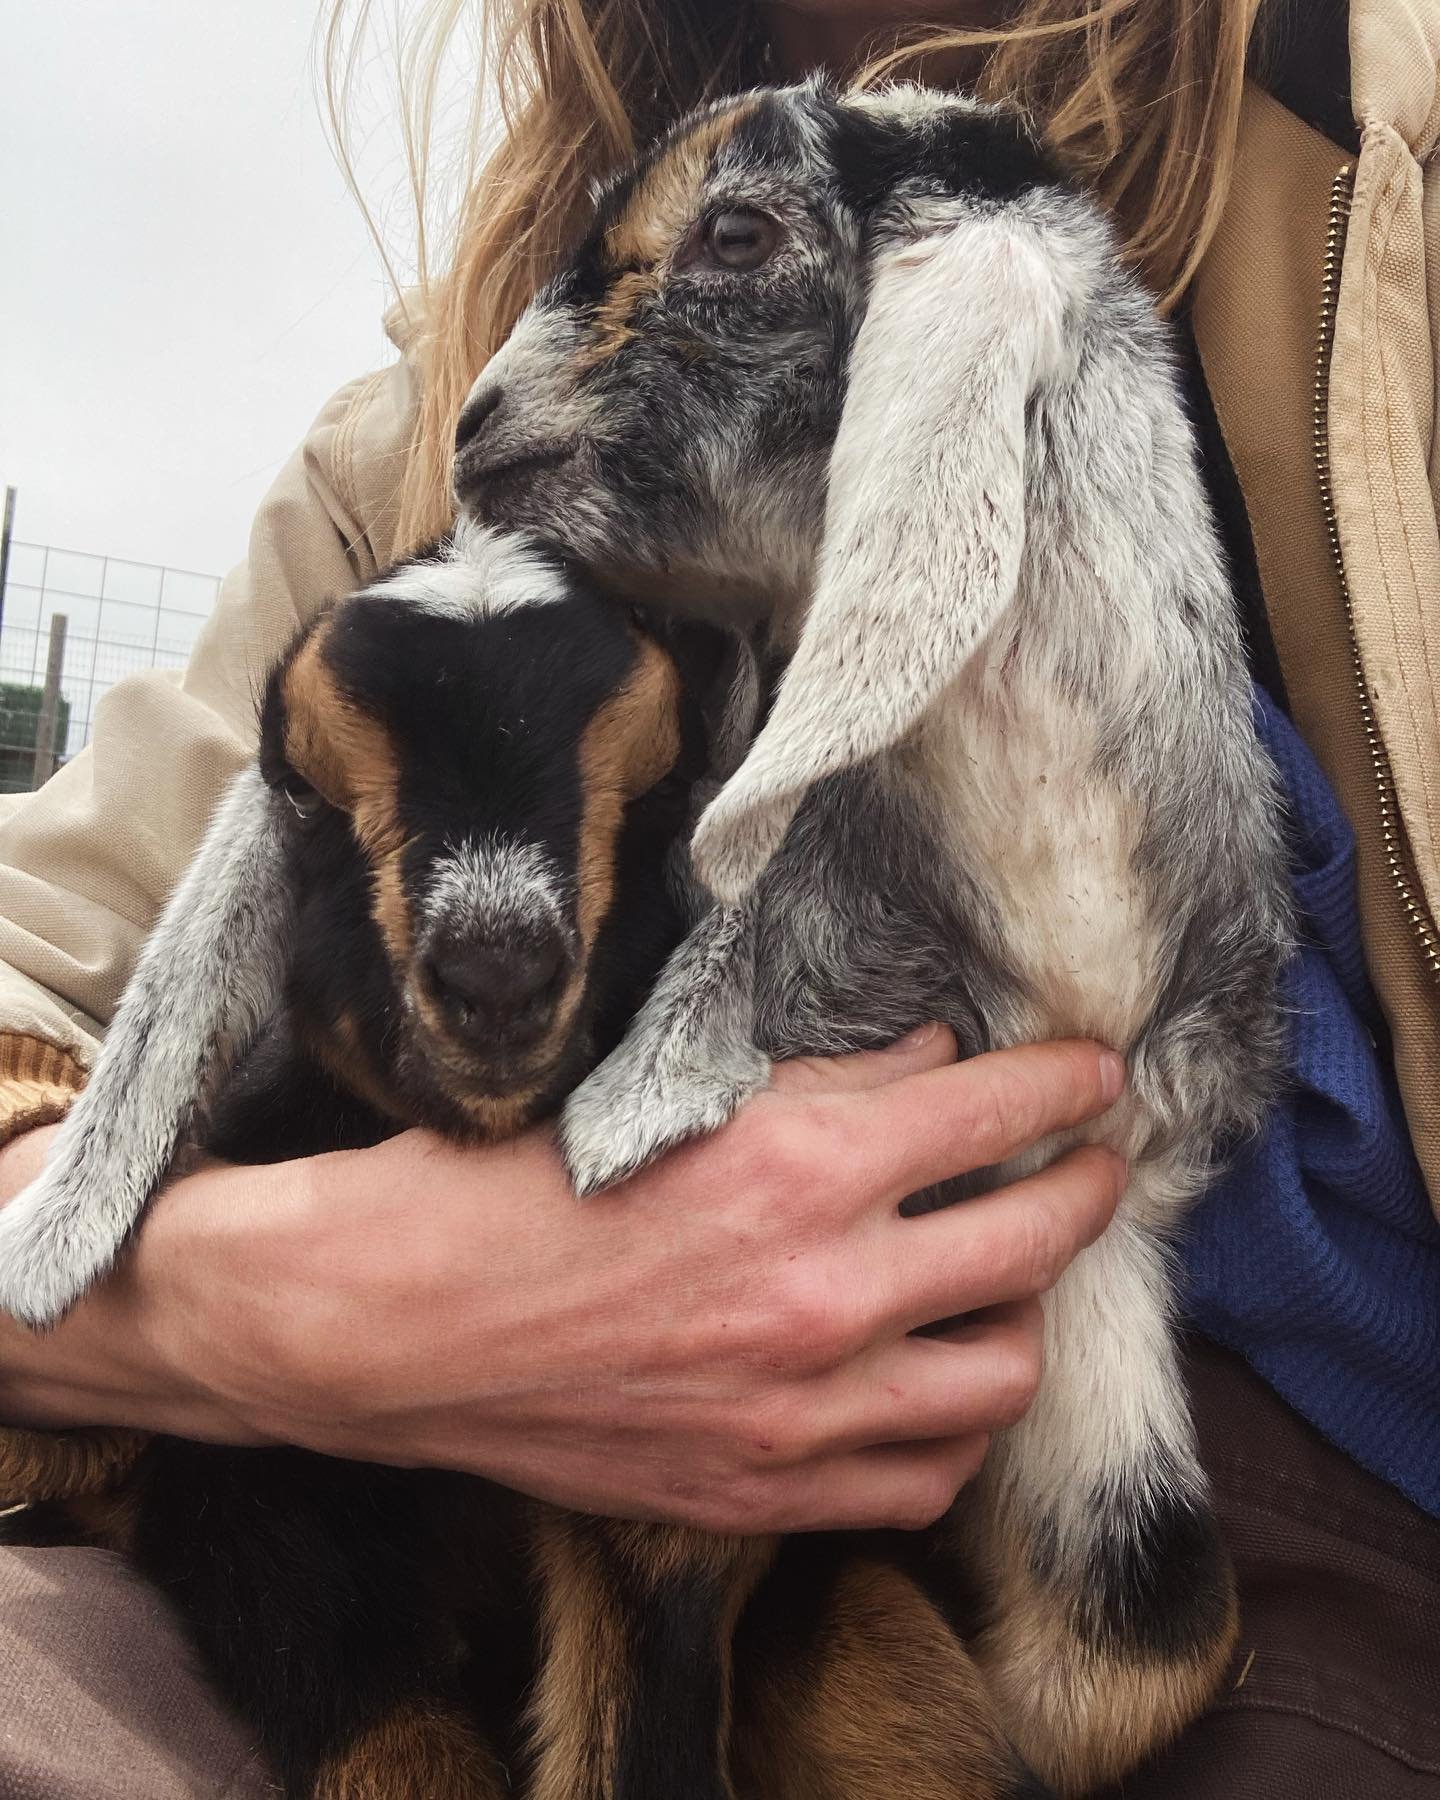 Eclipse babies 🌙 found the first two bb goats of the season this morning in the barn- healthy, warm, and so soft! Had considered driving across the country to see the eclipse today, but knew my goats were due and didn&rsquo;t want to leave them.
&bu